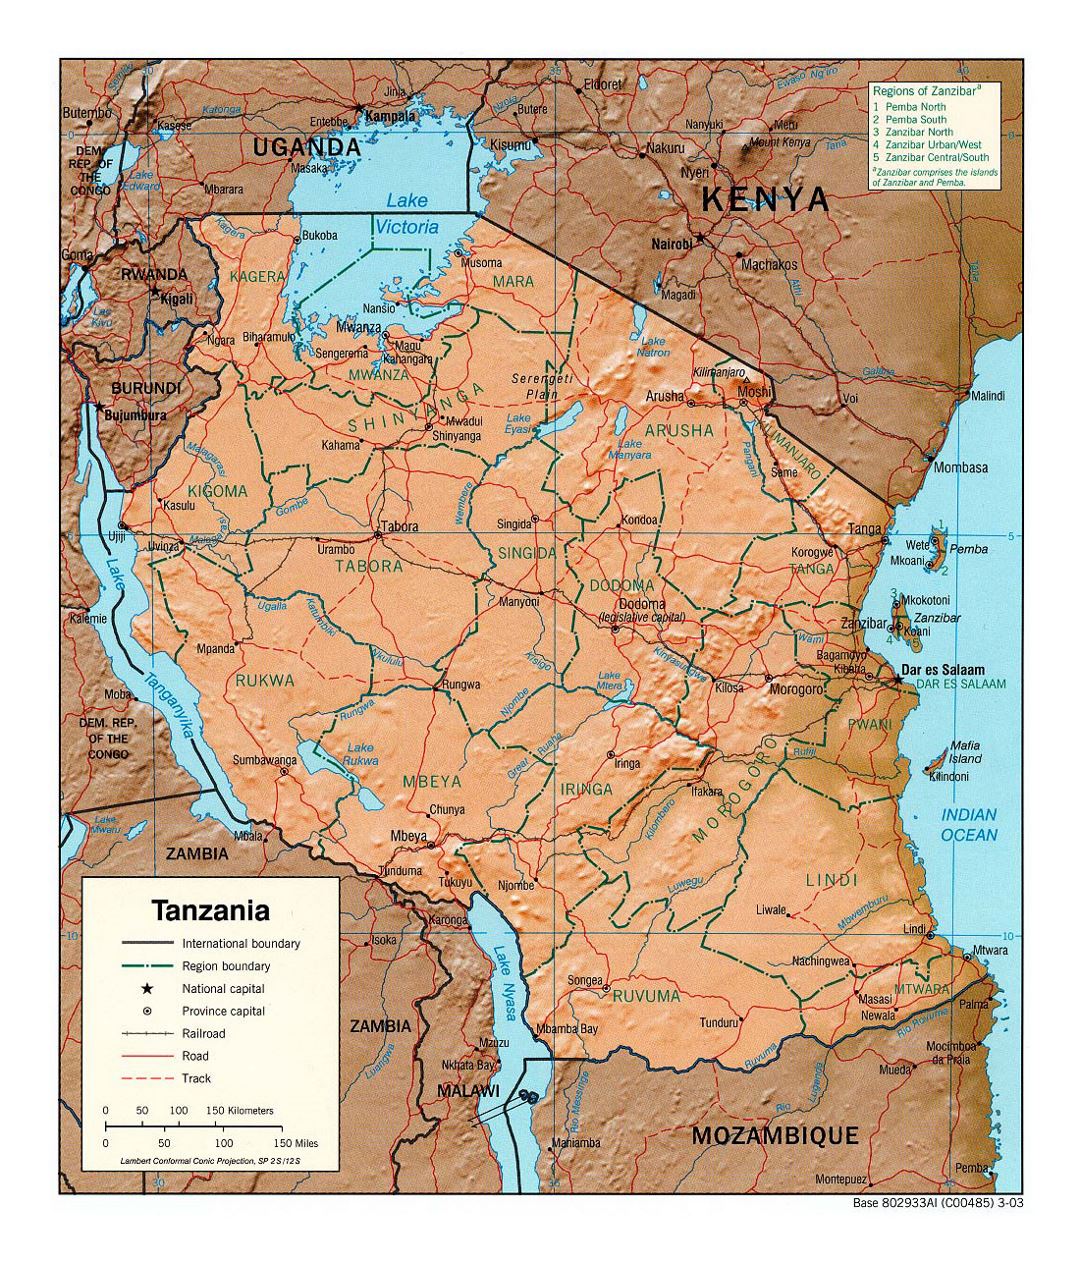 Detailed political and administrative map of Tanzania with relief, roads, railroads and major cities - 2003